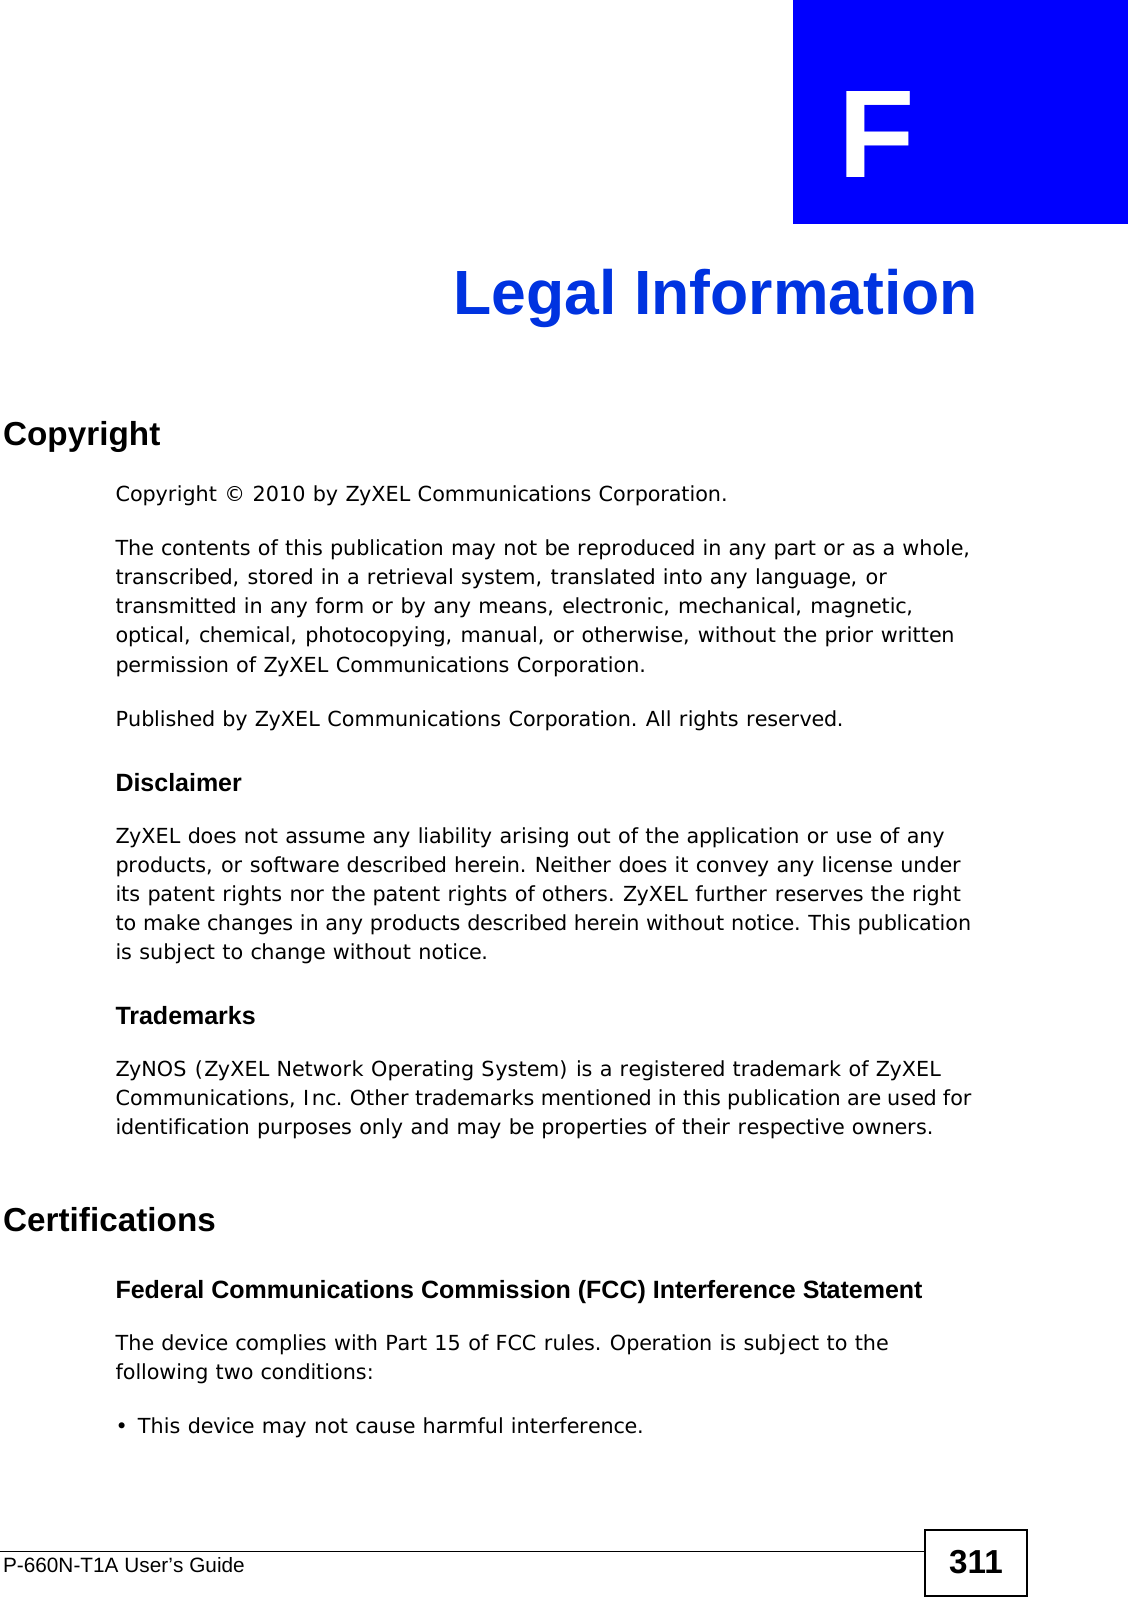 P-660N-T1A User’s Guide 311APPENDIX  F Legal InformationCopyrightCopyright © 2010 by ZyXEL Communications Corporation.The contents of this publication may not be reproduced in any part or as a whole, transcribed, stored in a retrieval system, translated into any language, or transmitted in any form or by any means, electronic, mechanical, magnetic, optical, chemical, photocopying, manual, or otherwise, without the prior written permission of ZyXEL Communications Corporation.Published by ZyXEL Communications Corporation. All rights reserved.DisclaimerZyXEL does not assume any liability arising out of the application or use of any products, or software described herein. Neither does it convey any license under its patent rights nor the patent rights of others. ZyXEL further reserves the right to make changes in any products described herein without notice. This publication is subject to change without notice.TrademarksZyNOS (ZyXEL Network Operating System) is a registered trademark of ZyXEL Communications, Inc. Other trademarks mentioned in this publication are used for identification purposes only and may be properties of their respective owners.CertificationsFederal Communications Commission (FCC) Interference StatementThe device complies with Part 15 of FCC rules. Operation is subject to the following two conditions:• This device may not cause harmful interference.